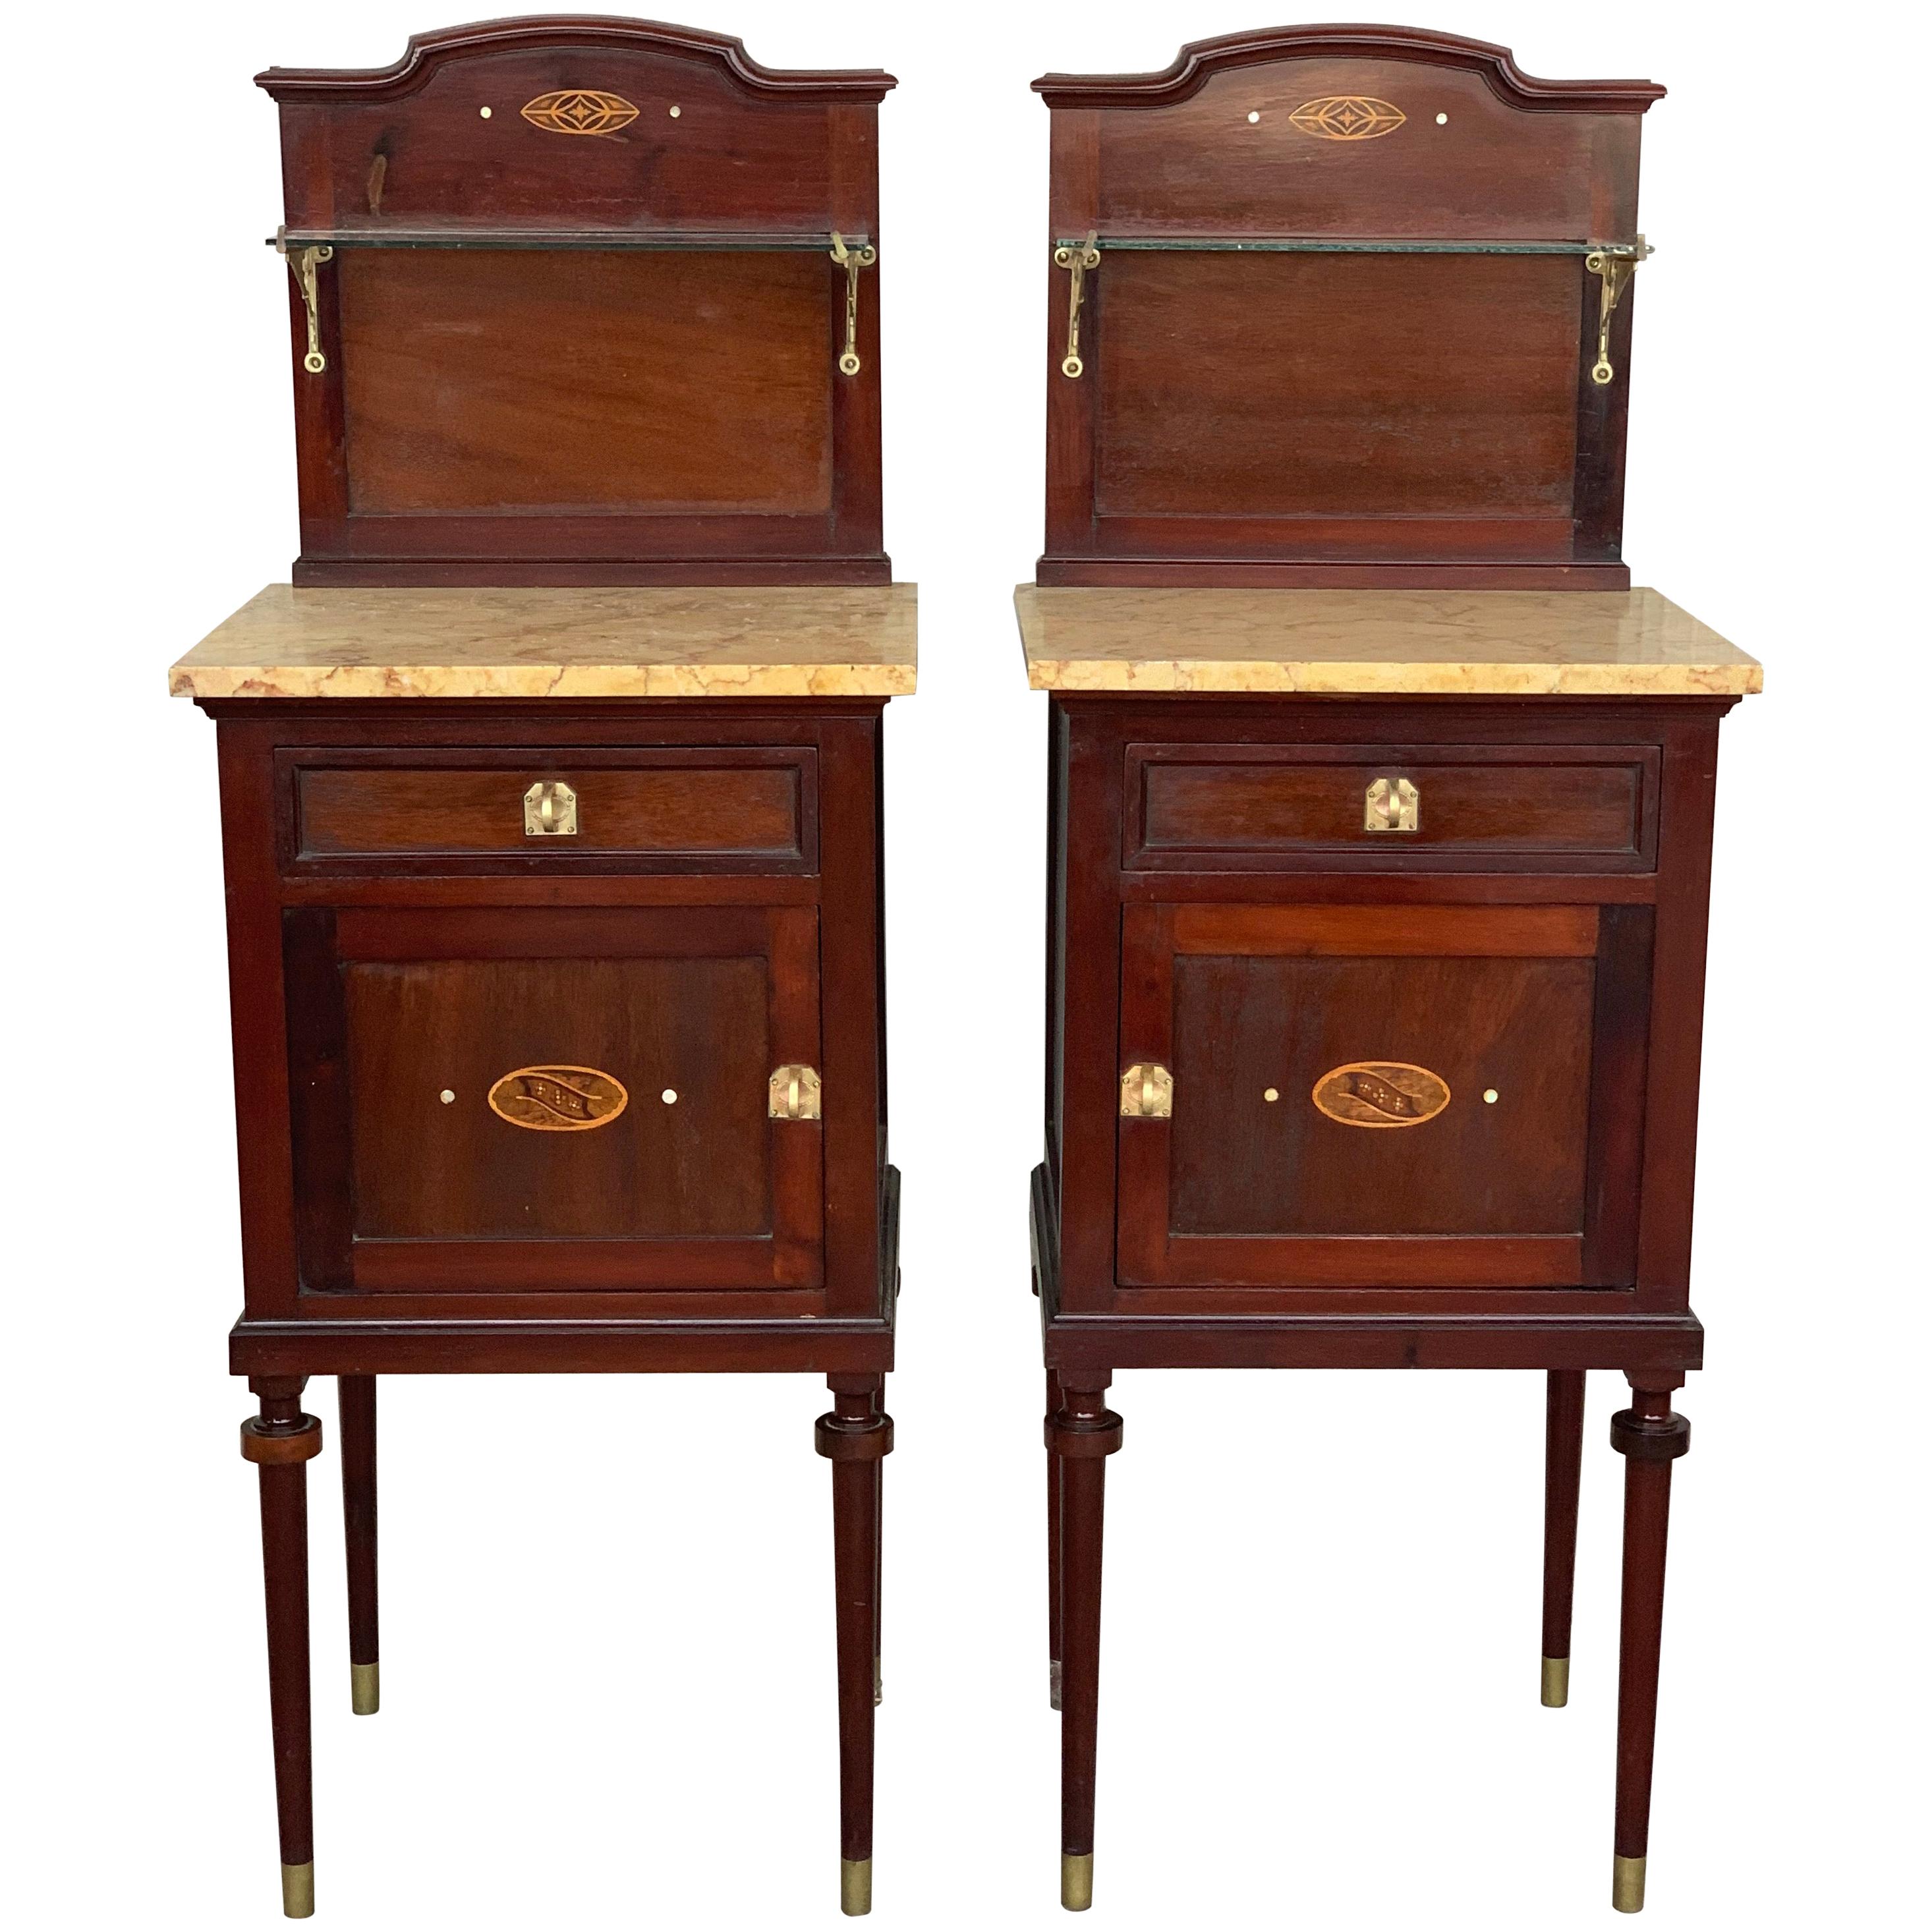 Art Nouveau Pair of Walnut Nightstands with Crest, Marble Top and Glass Shelve